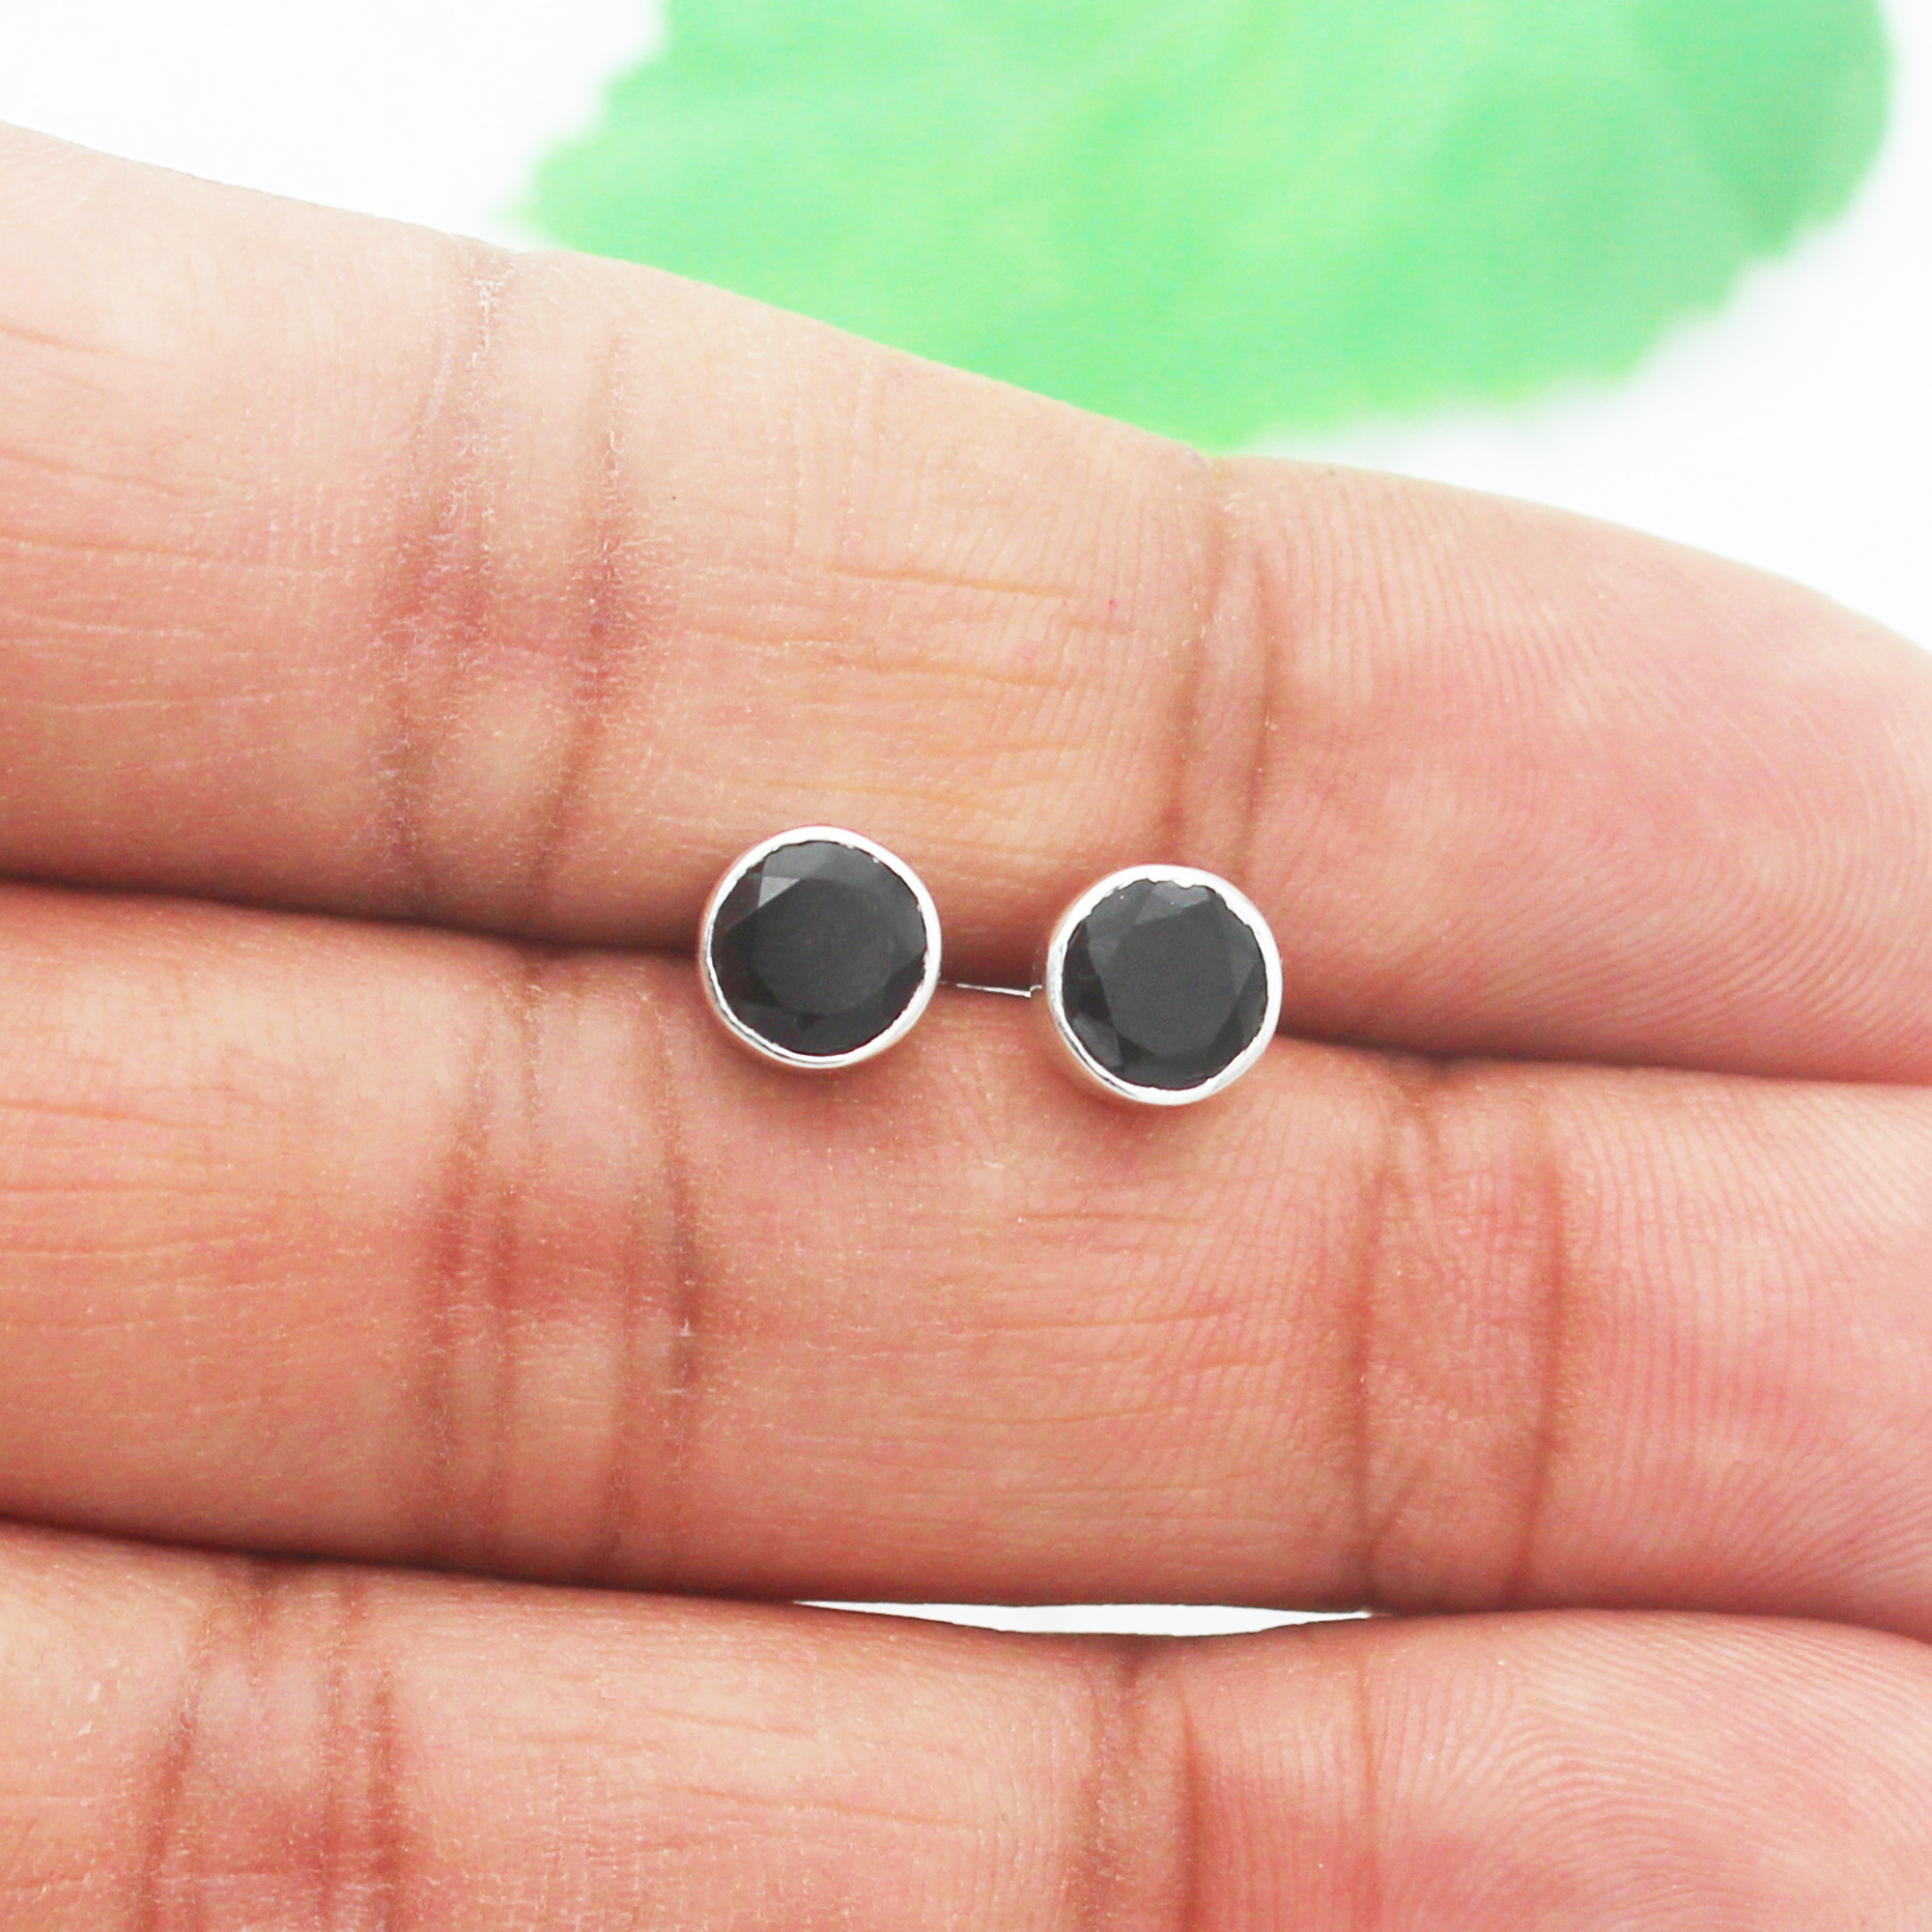 Handmade Eco-Friendly Men's Stud Earrings - Shop Online at Earth Song  Jewelry